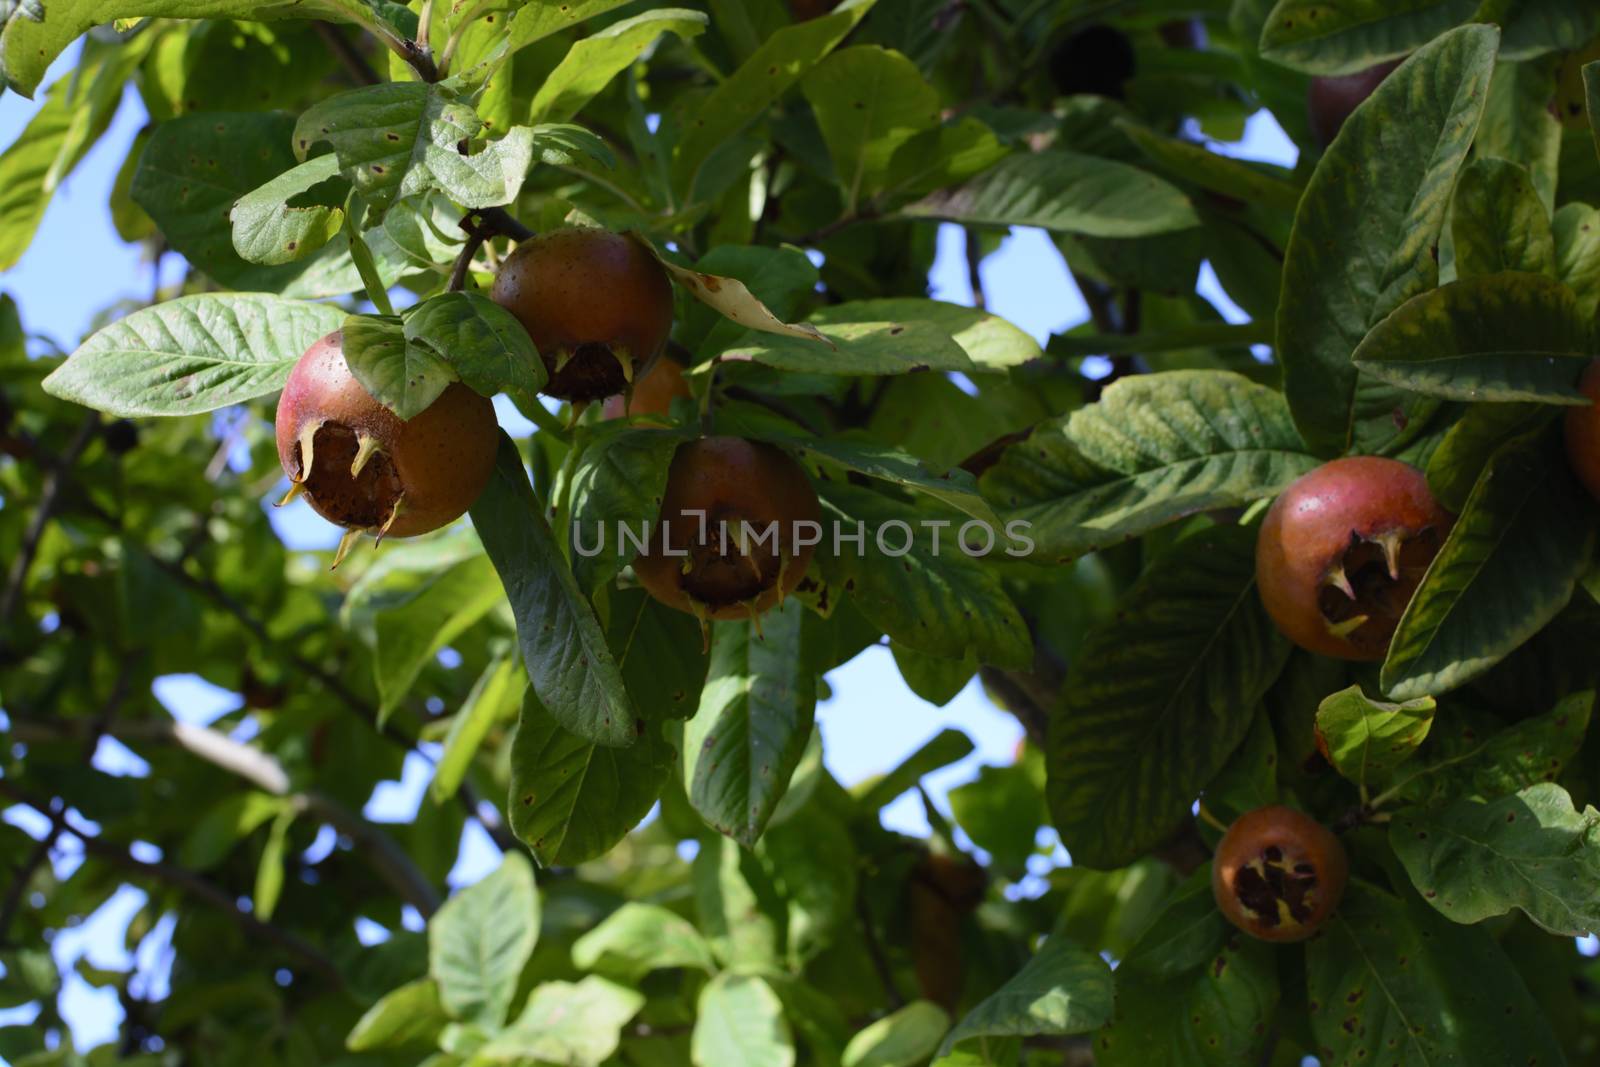 Mespilus germanica, Nesplera. Mespilus germanica, known as the medlar or common medlar, is a large shrub or small tree, and the name of the fruit of this tree.